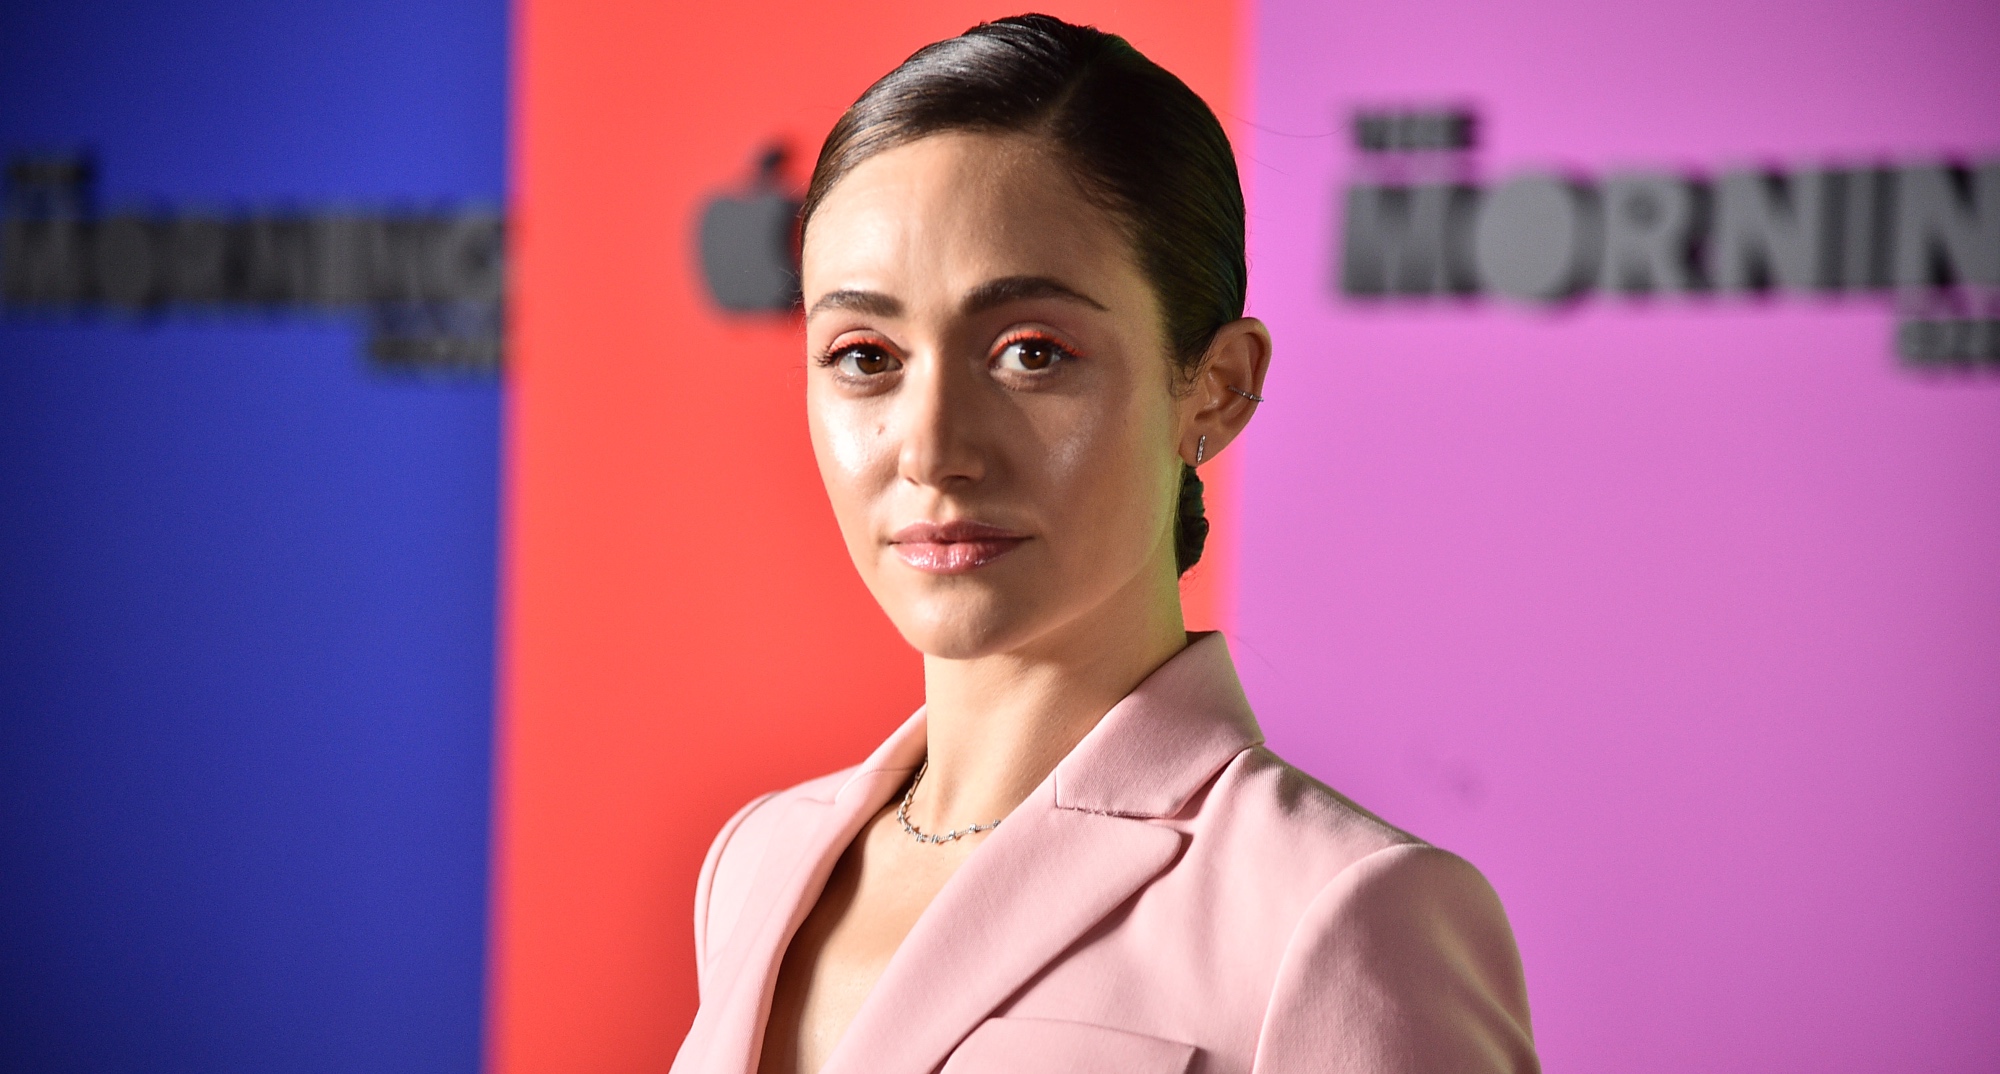 Emmy Rossum will star in 'The Crowded Room' anthology series wearing pink suit.